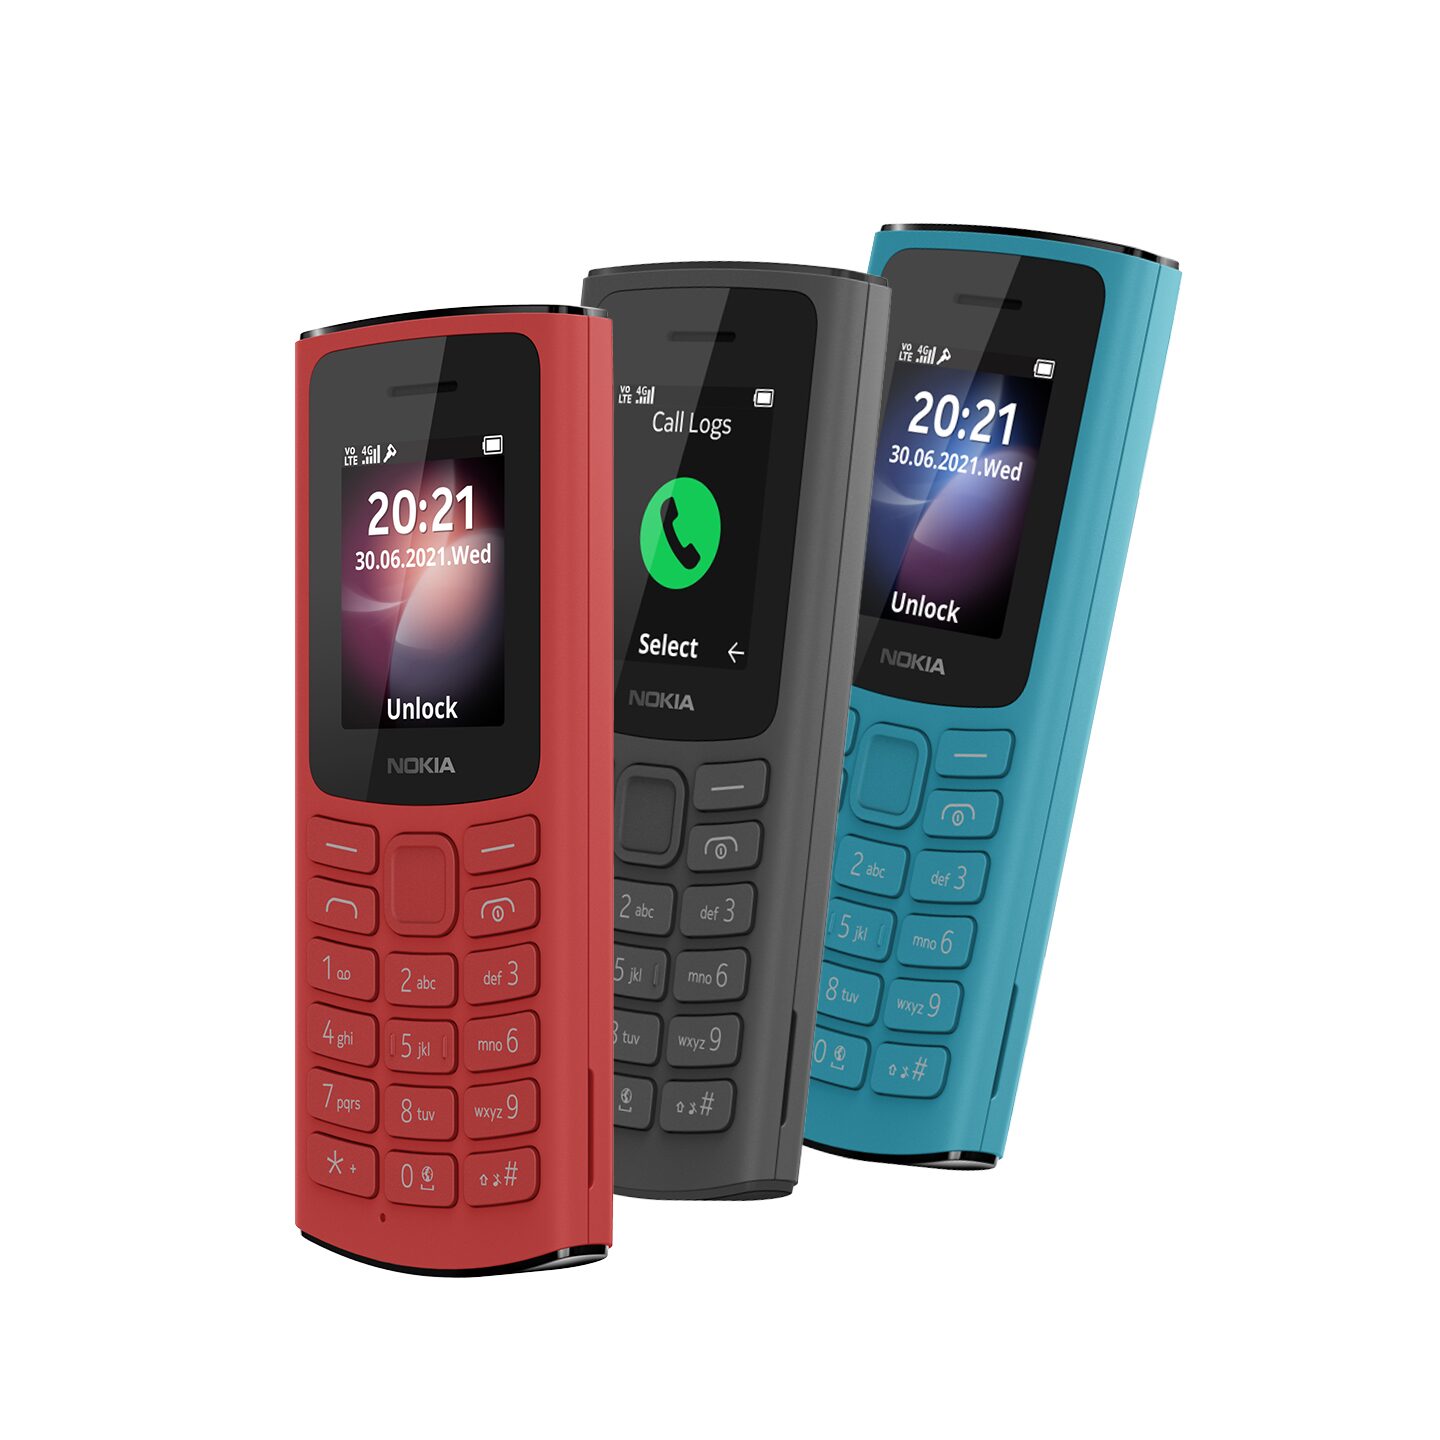 Nokia 110 4G, Nokia 105 4G feature phones launched, price